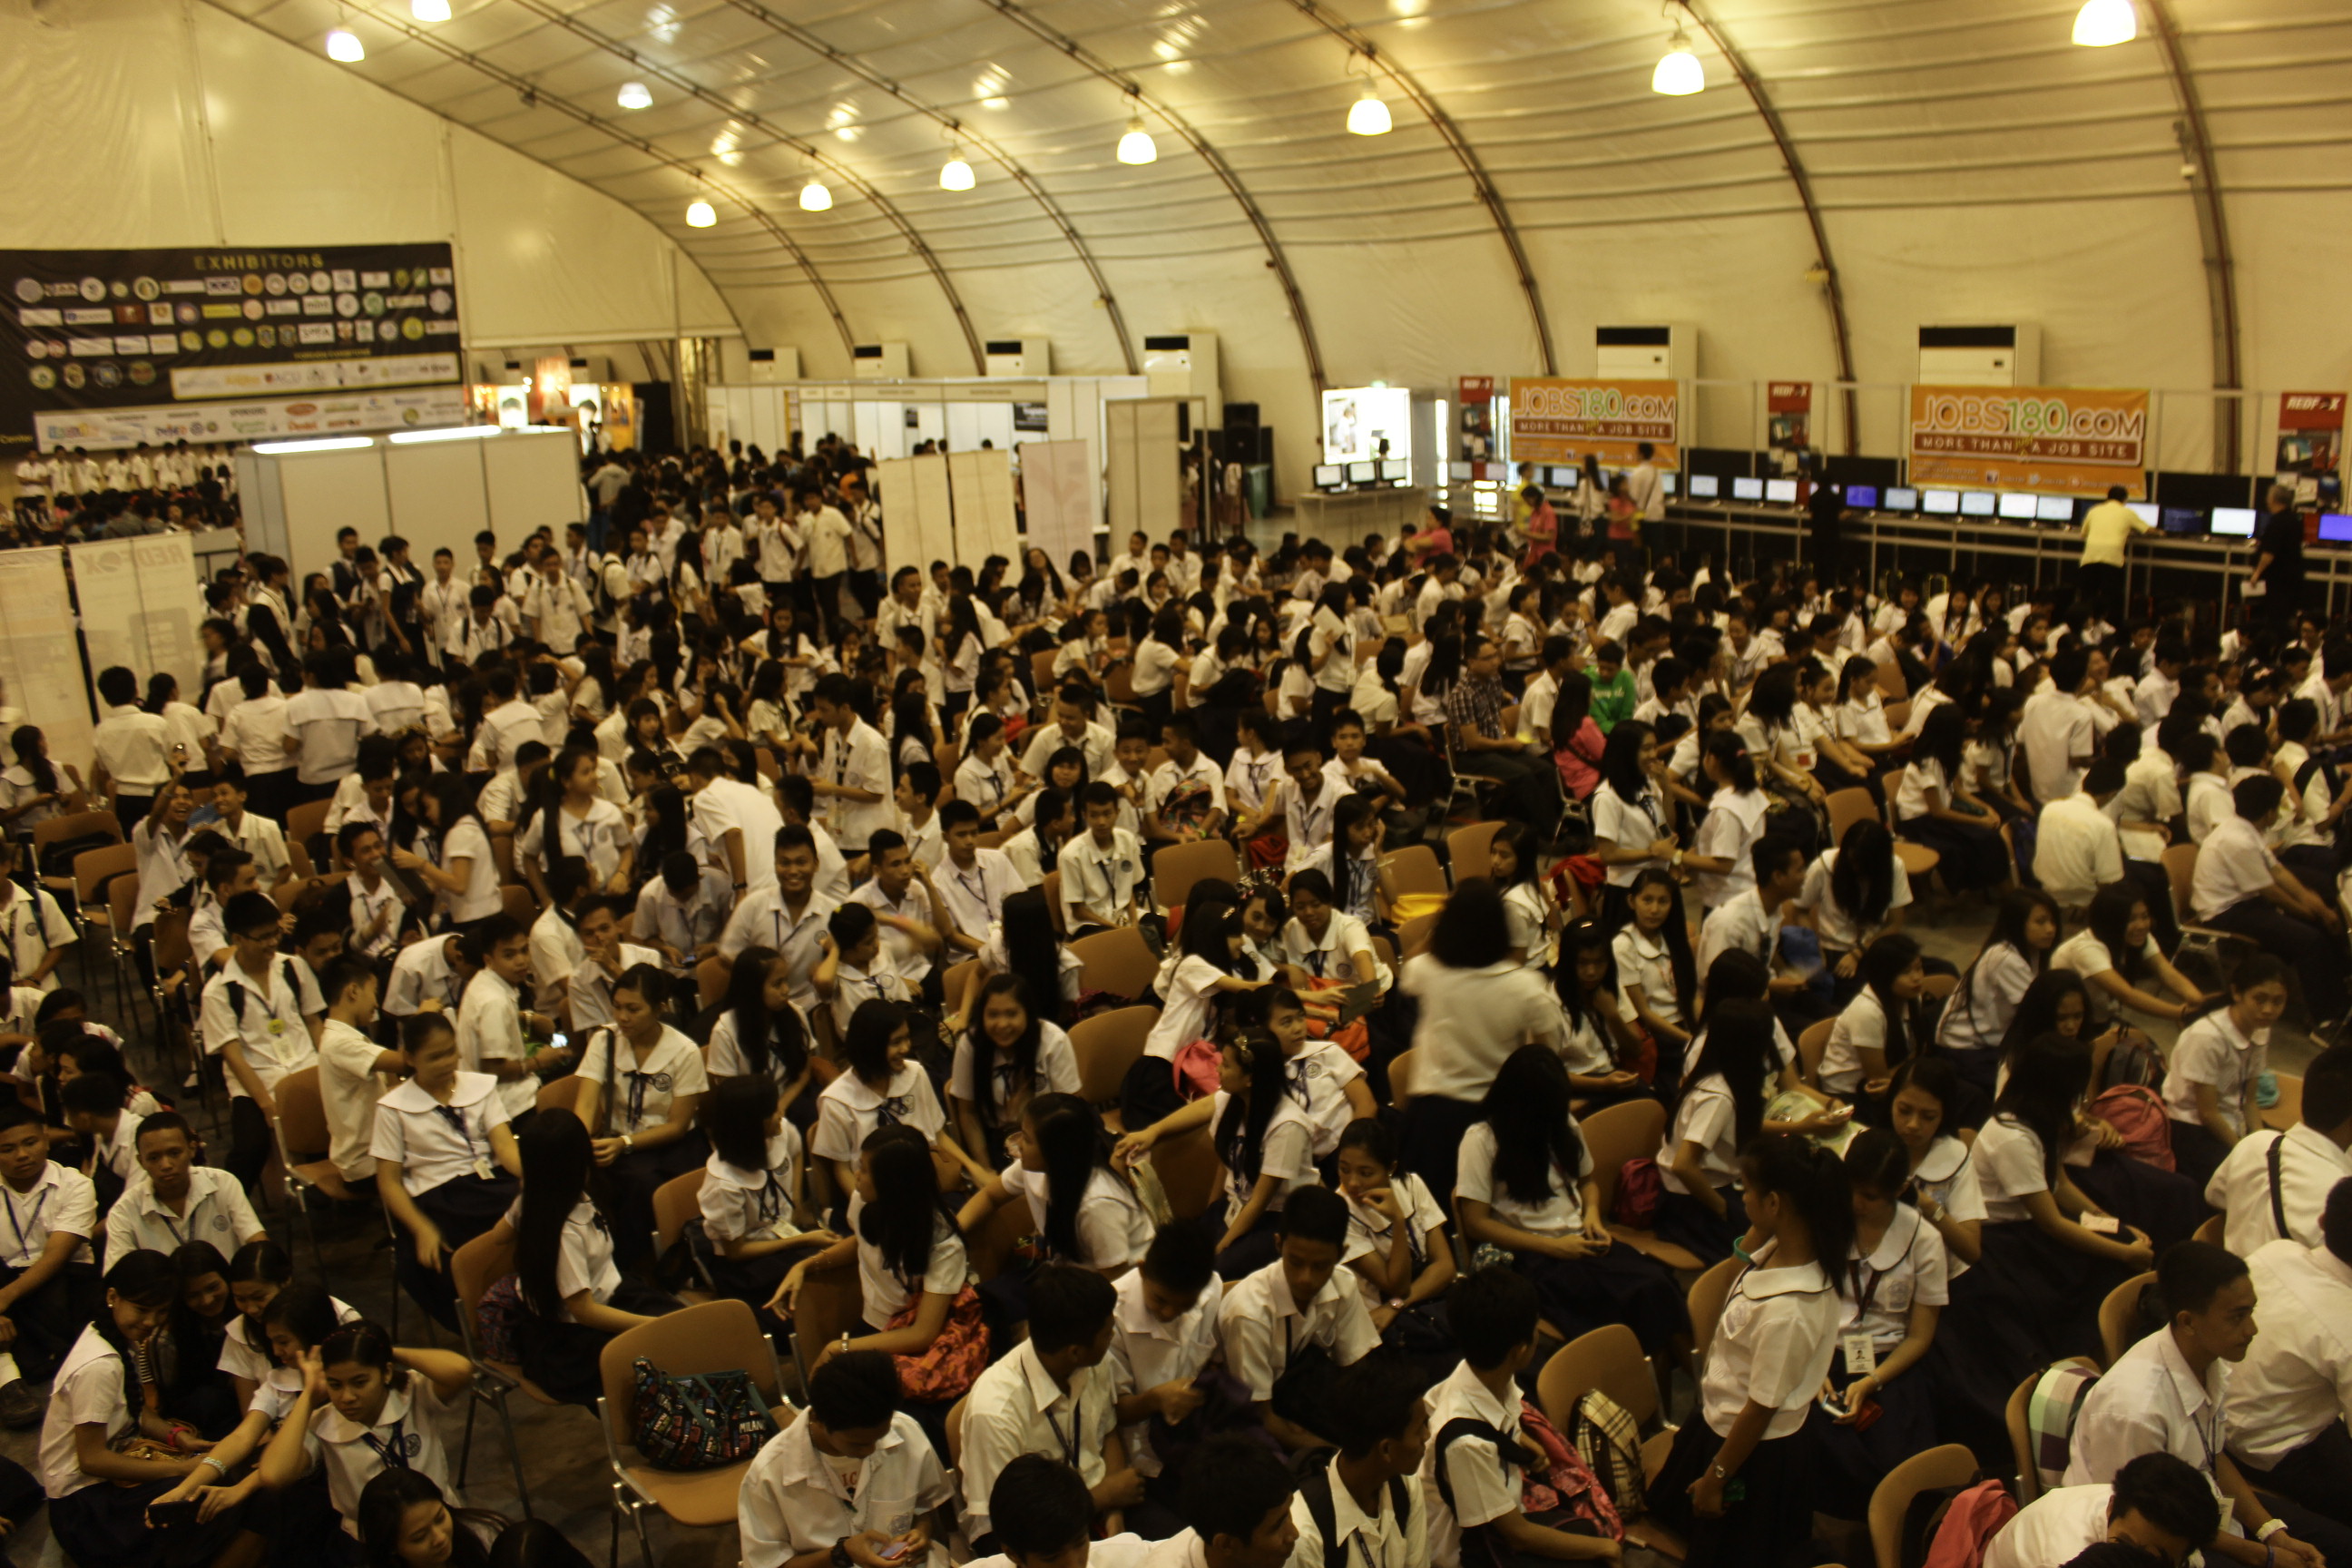 10,070 high school students are gearing up for the 26th Career Counseling & Guidance Fair